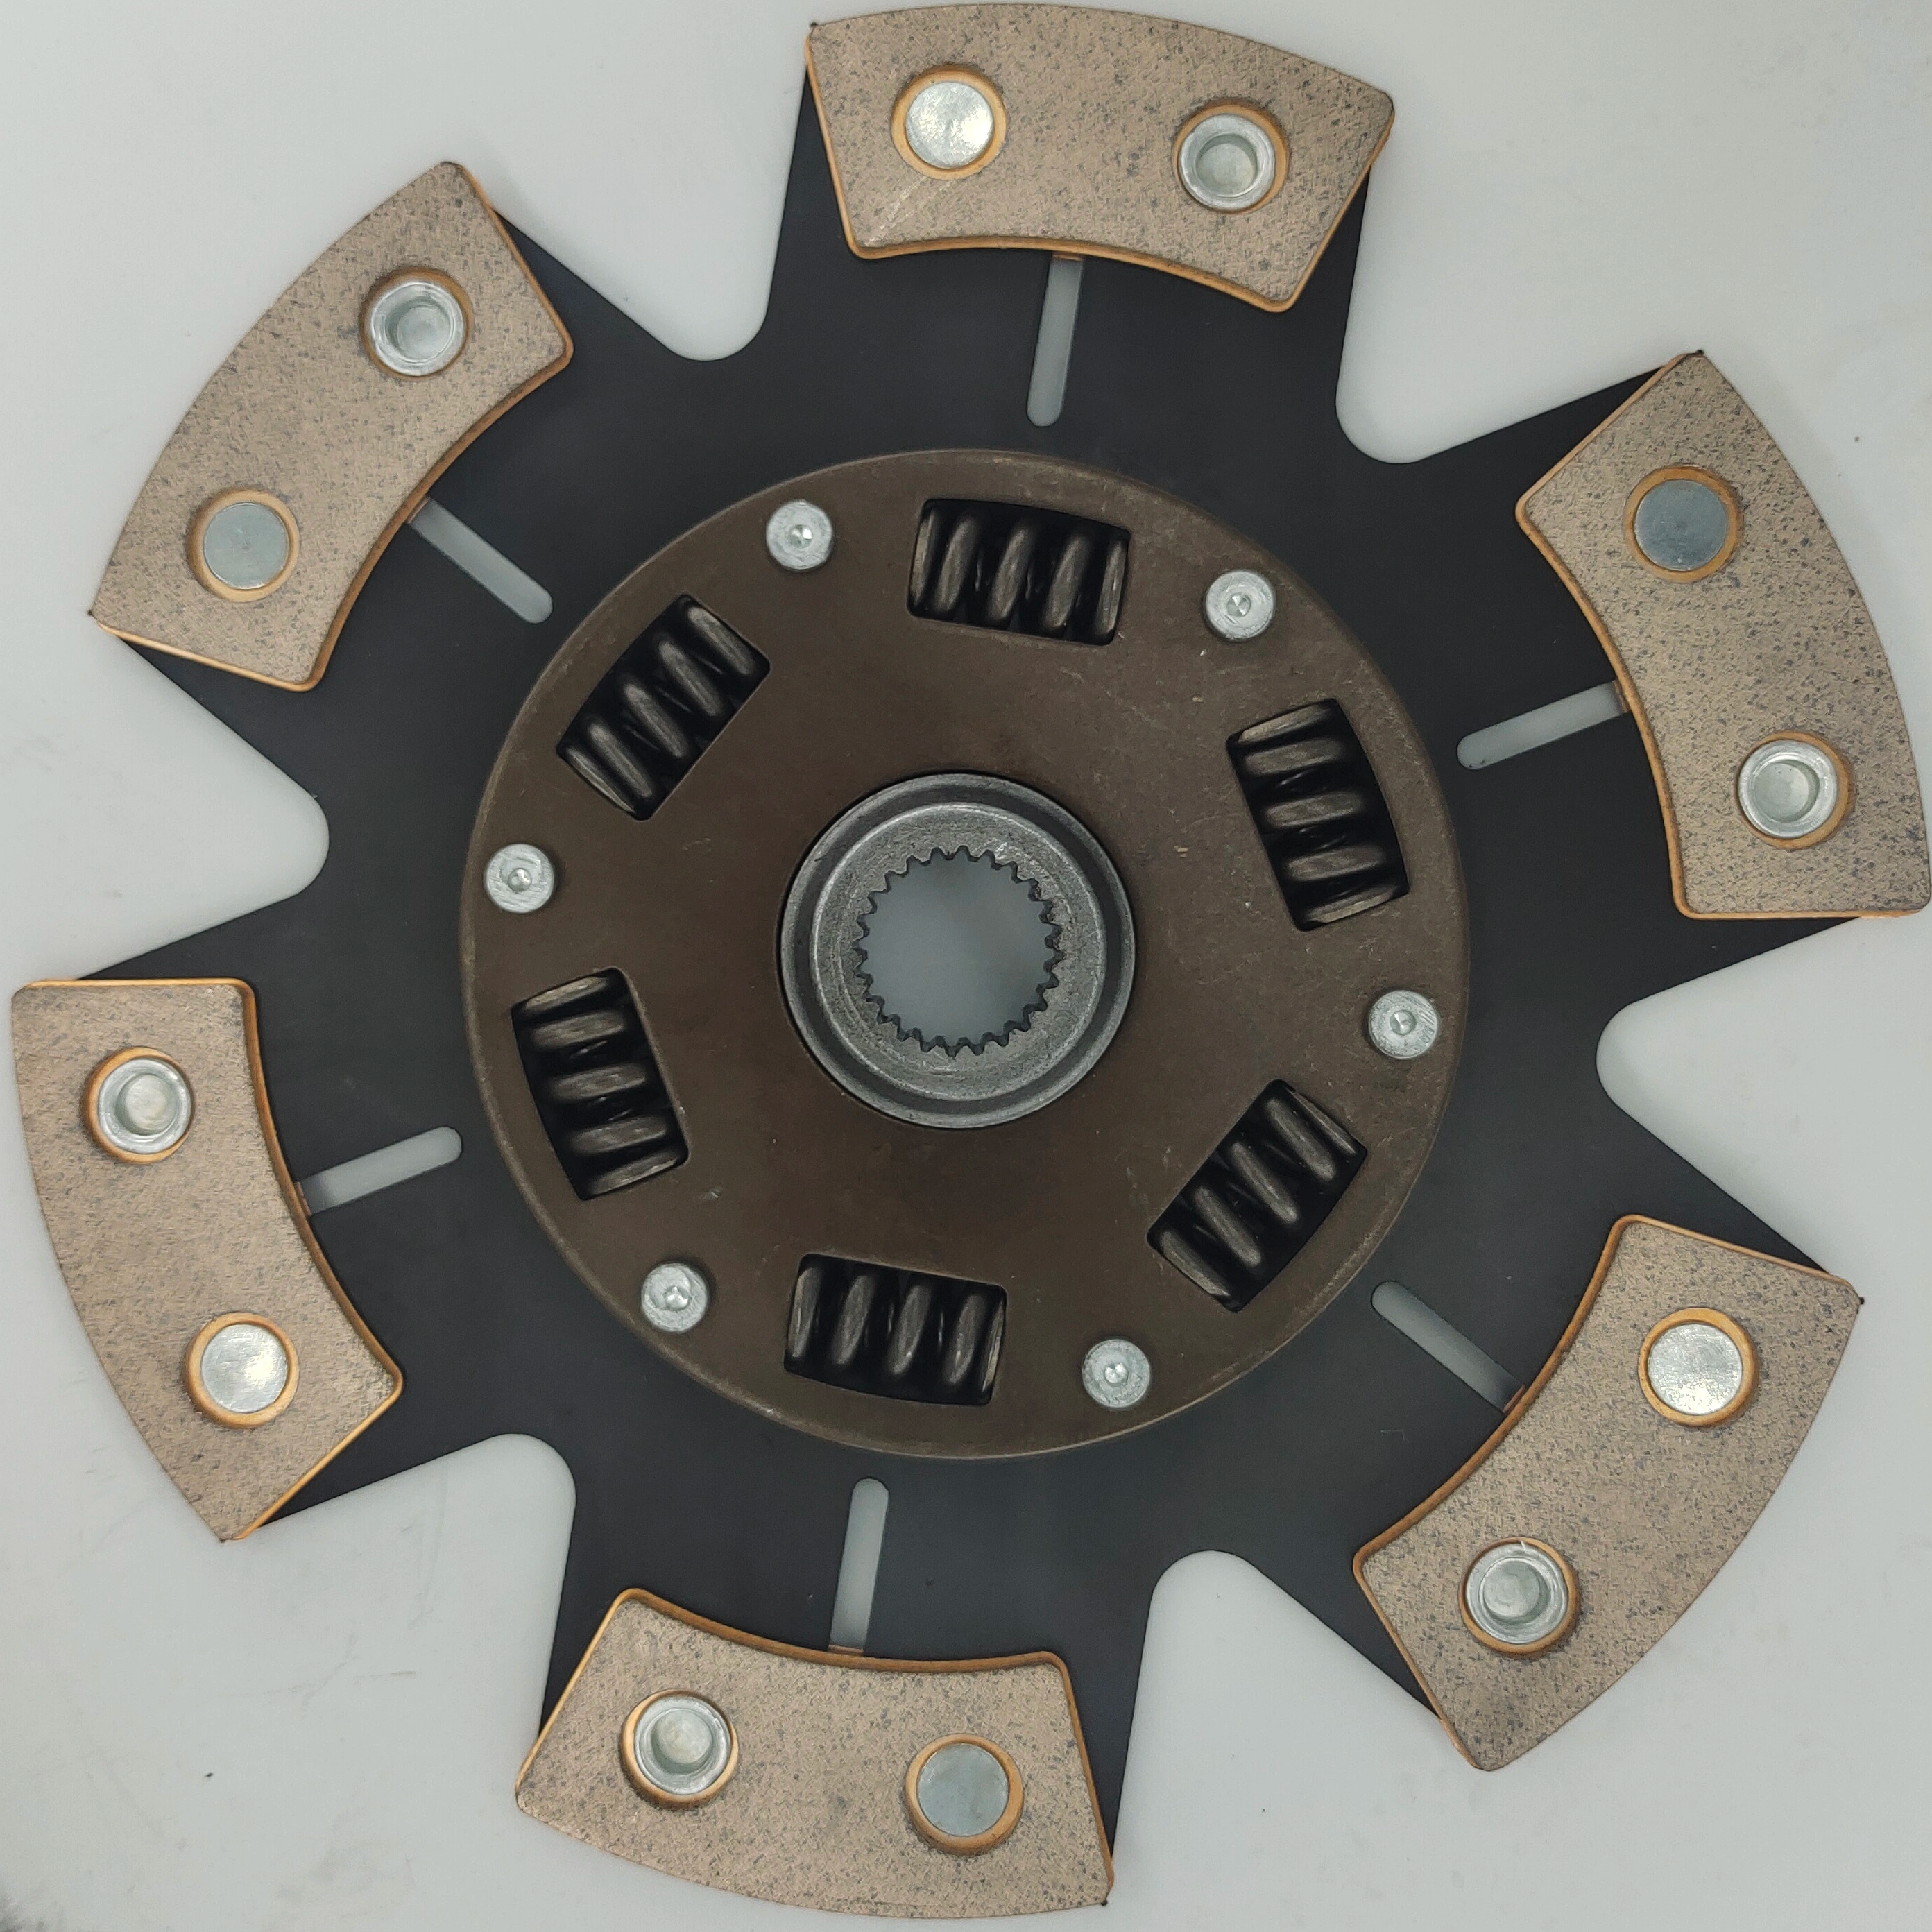 Street Performance Clutch disc for nissan